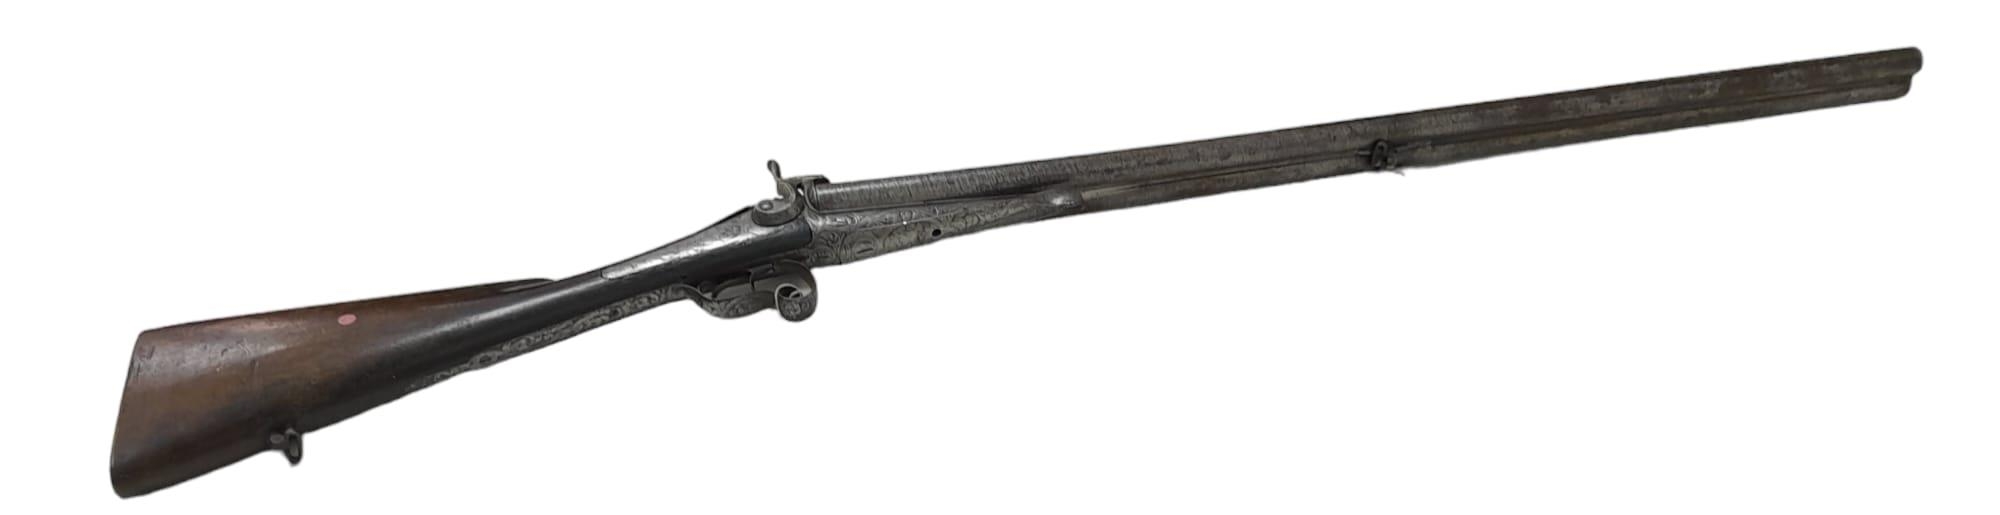 A 16 BORE PIN FIRE ANTIQUE SIDE BY SIDE DOUBLE BARRELED SHOTGUN WITH PATTERNED METALWORK a/f - Image 4 of 12